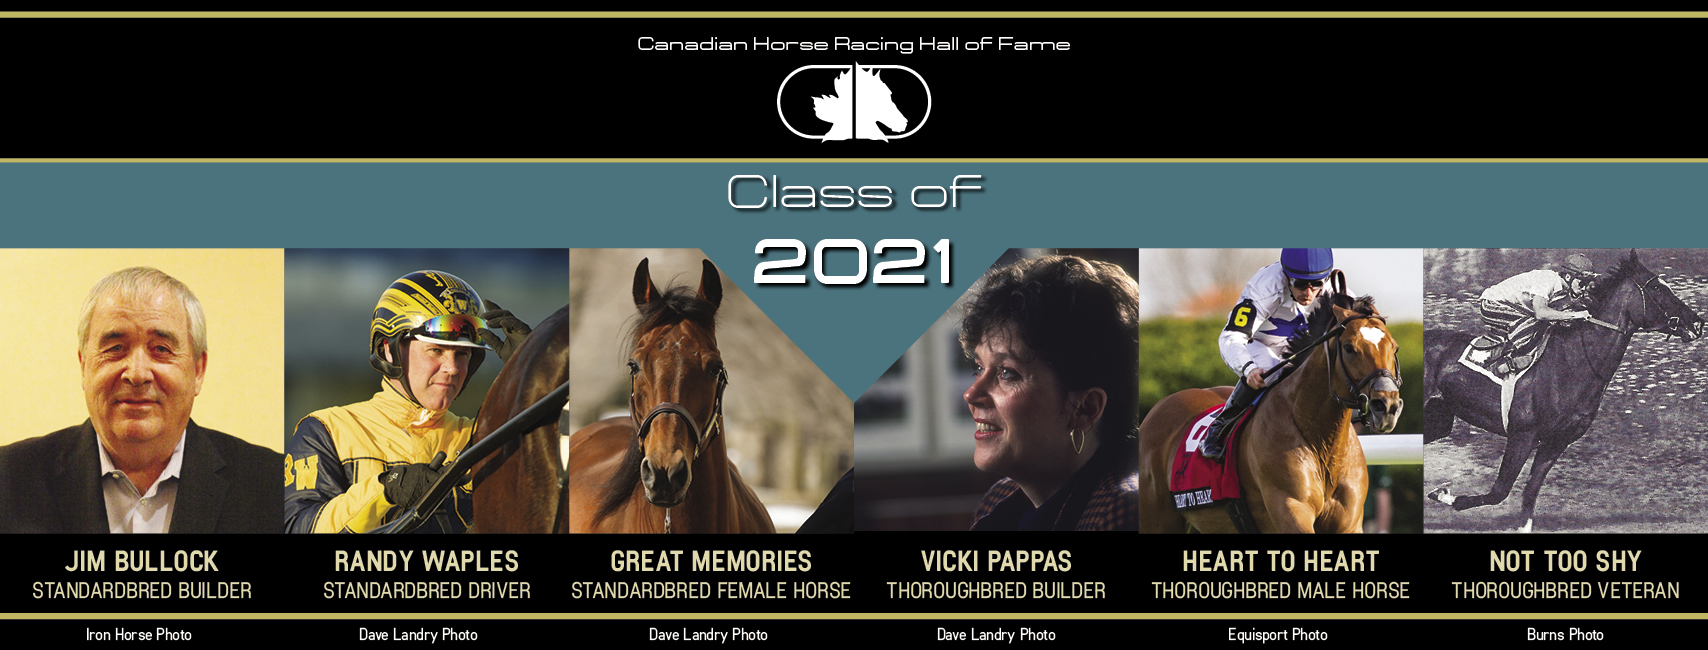 Jim Bullock, Vicki Pappas, Randy Waples and horses Great Memories, Heart to Heart and Not Too Shy named Canadian Horse Racing Hall of Fame 2021 Inductees